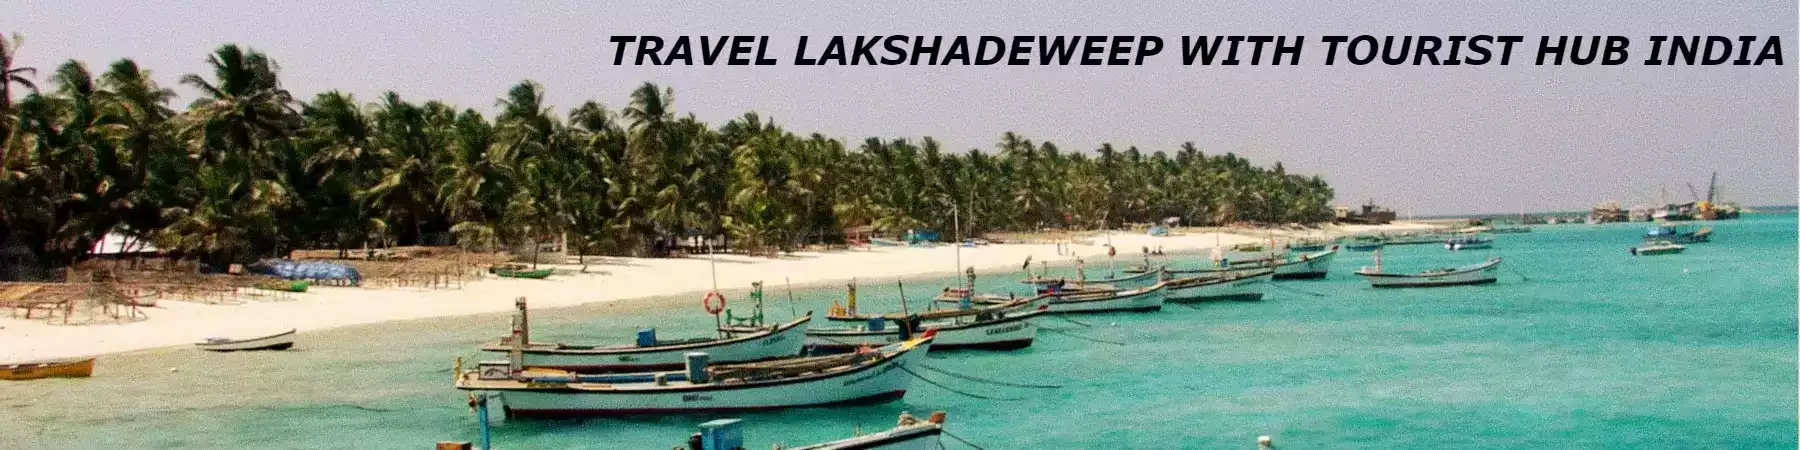 Lakshadweep holiday packages from Mumbai with Tourist Hub India - The Best Lakshadweep Travel Agency